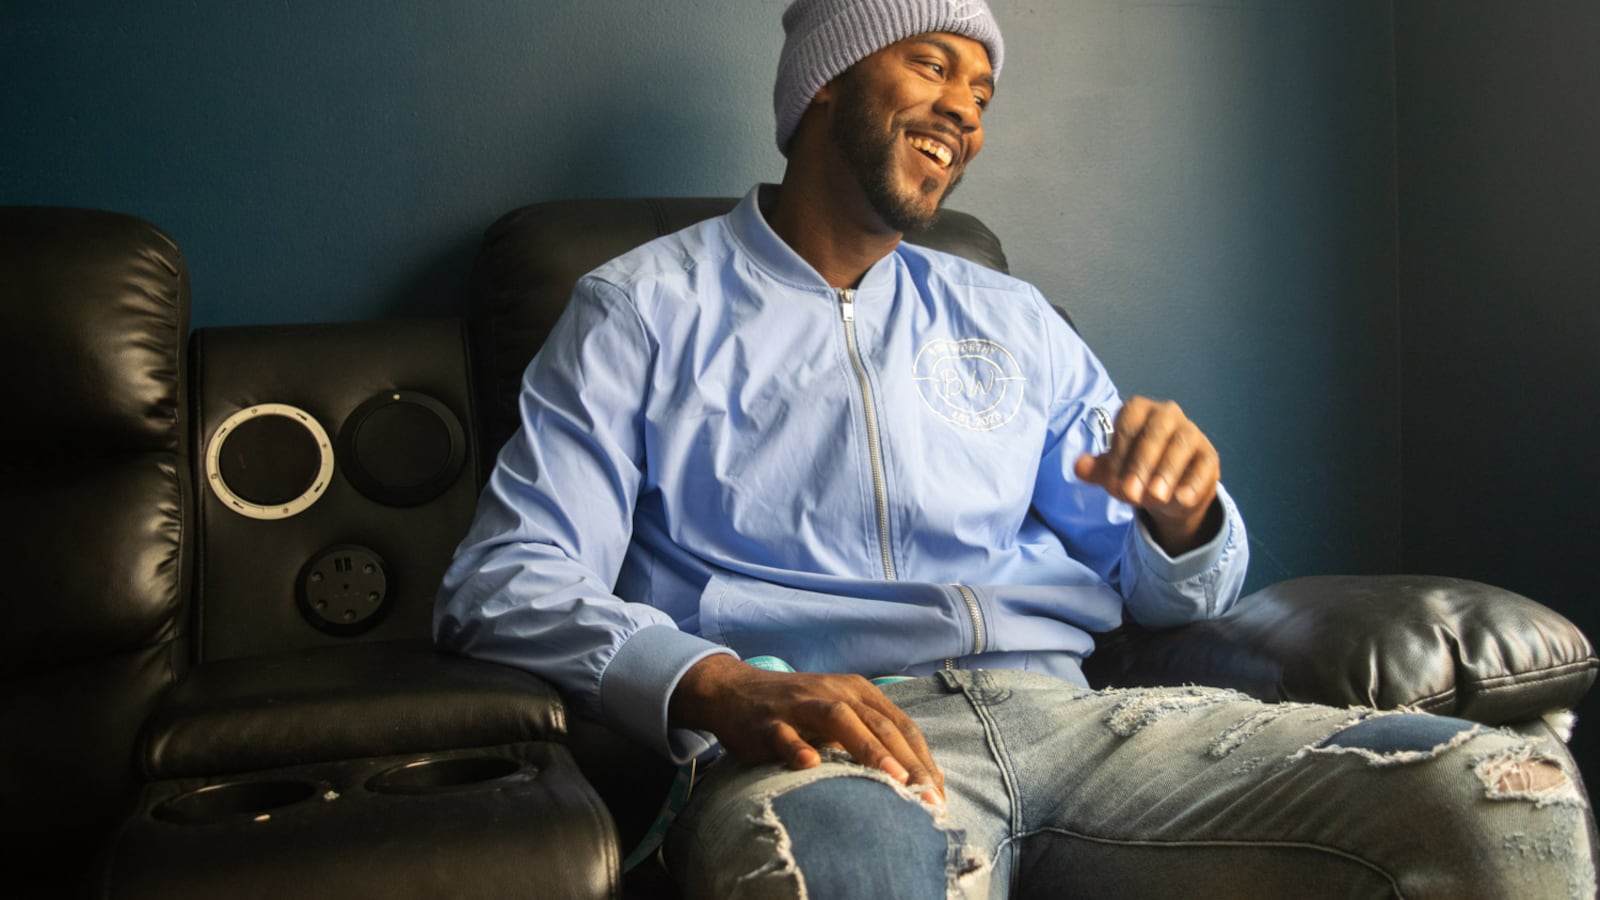 A man sitting on a black couch smiles and looks off into the distance, his eyes slightly down. He is turned toward a window, so light illuminates his body. He is wearing a knit beanie, blue windbreaker, and lightwash jeans. The jeans have rips with a darker denim underneath them. One of his hands is mid-motion, coming down from him rubbing his mouth and laughing. He looks comfortable and laid back.